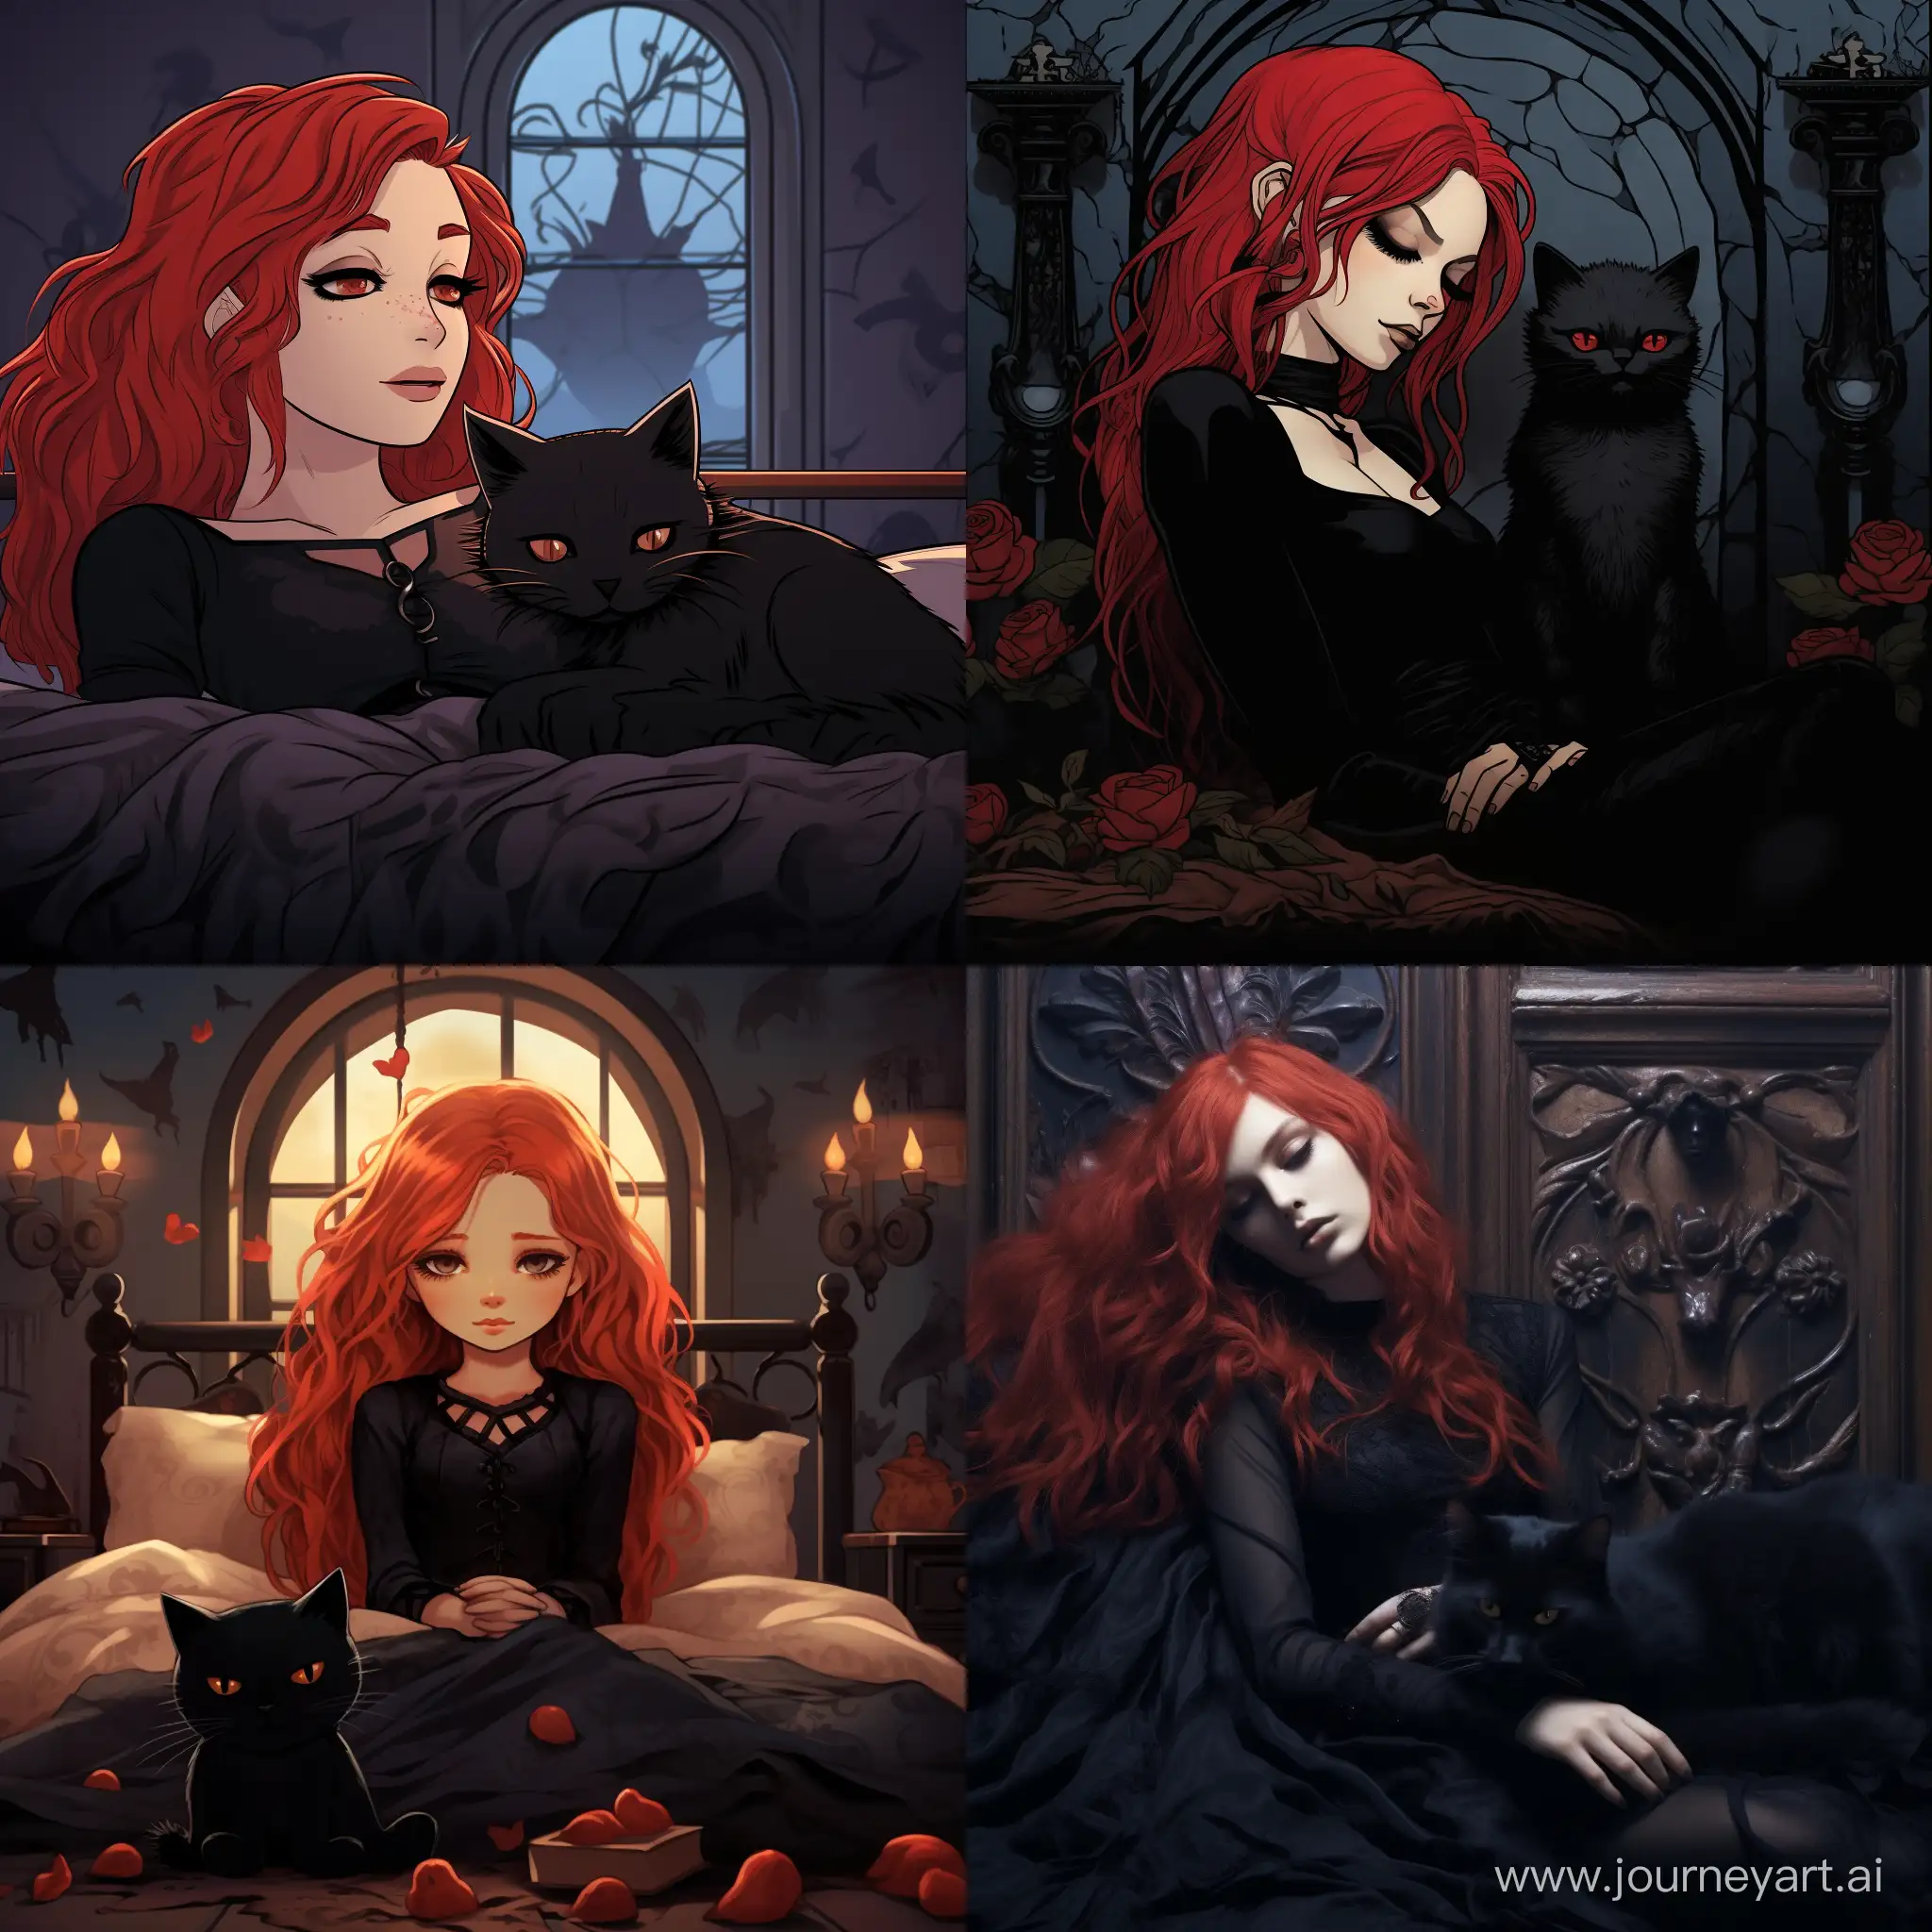 RedHaired-Gothic-Girl-Sleeping-Beside-Stylish-Cat